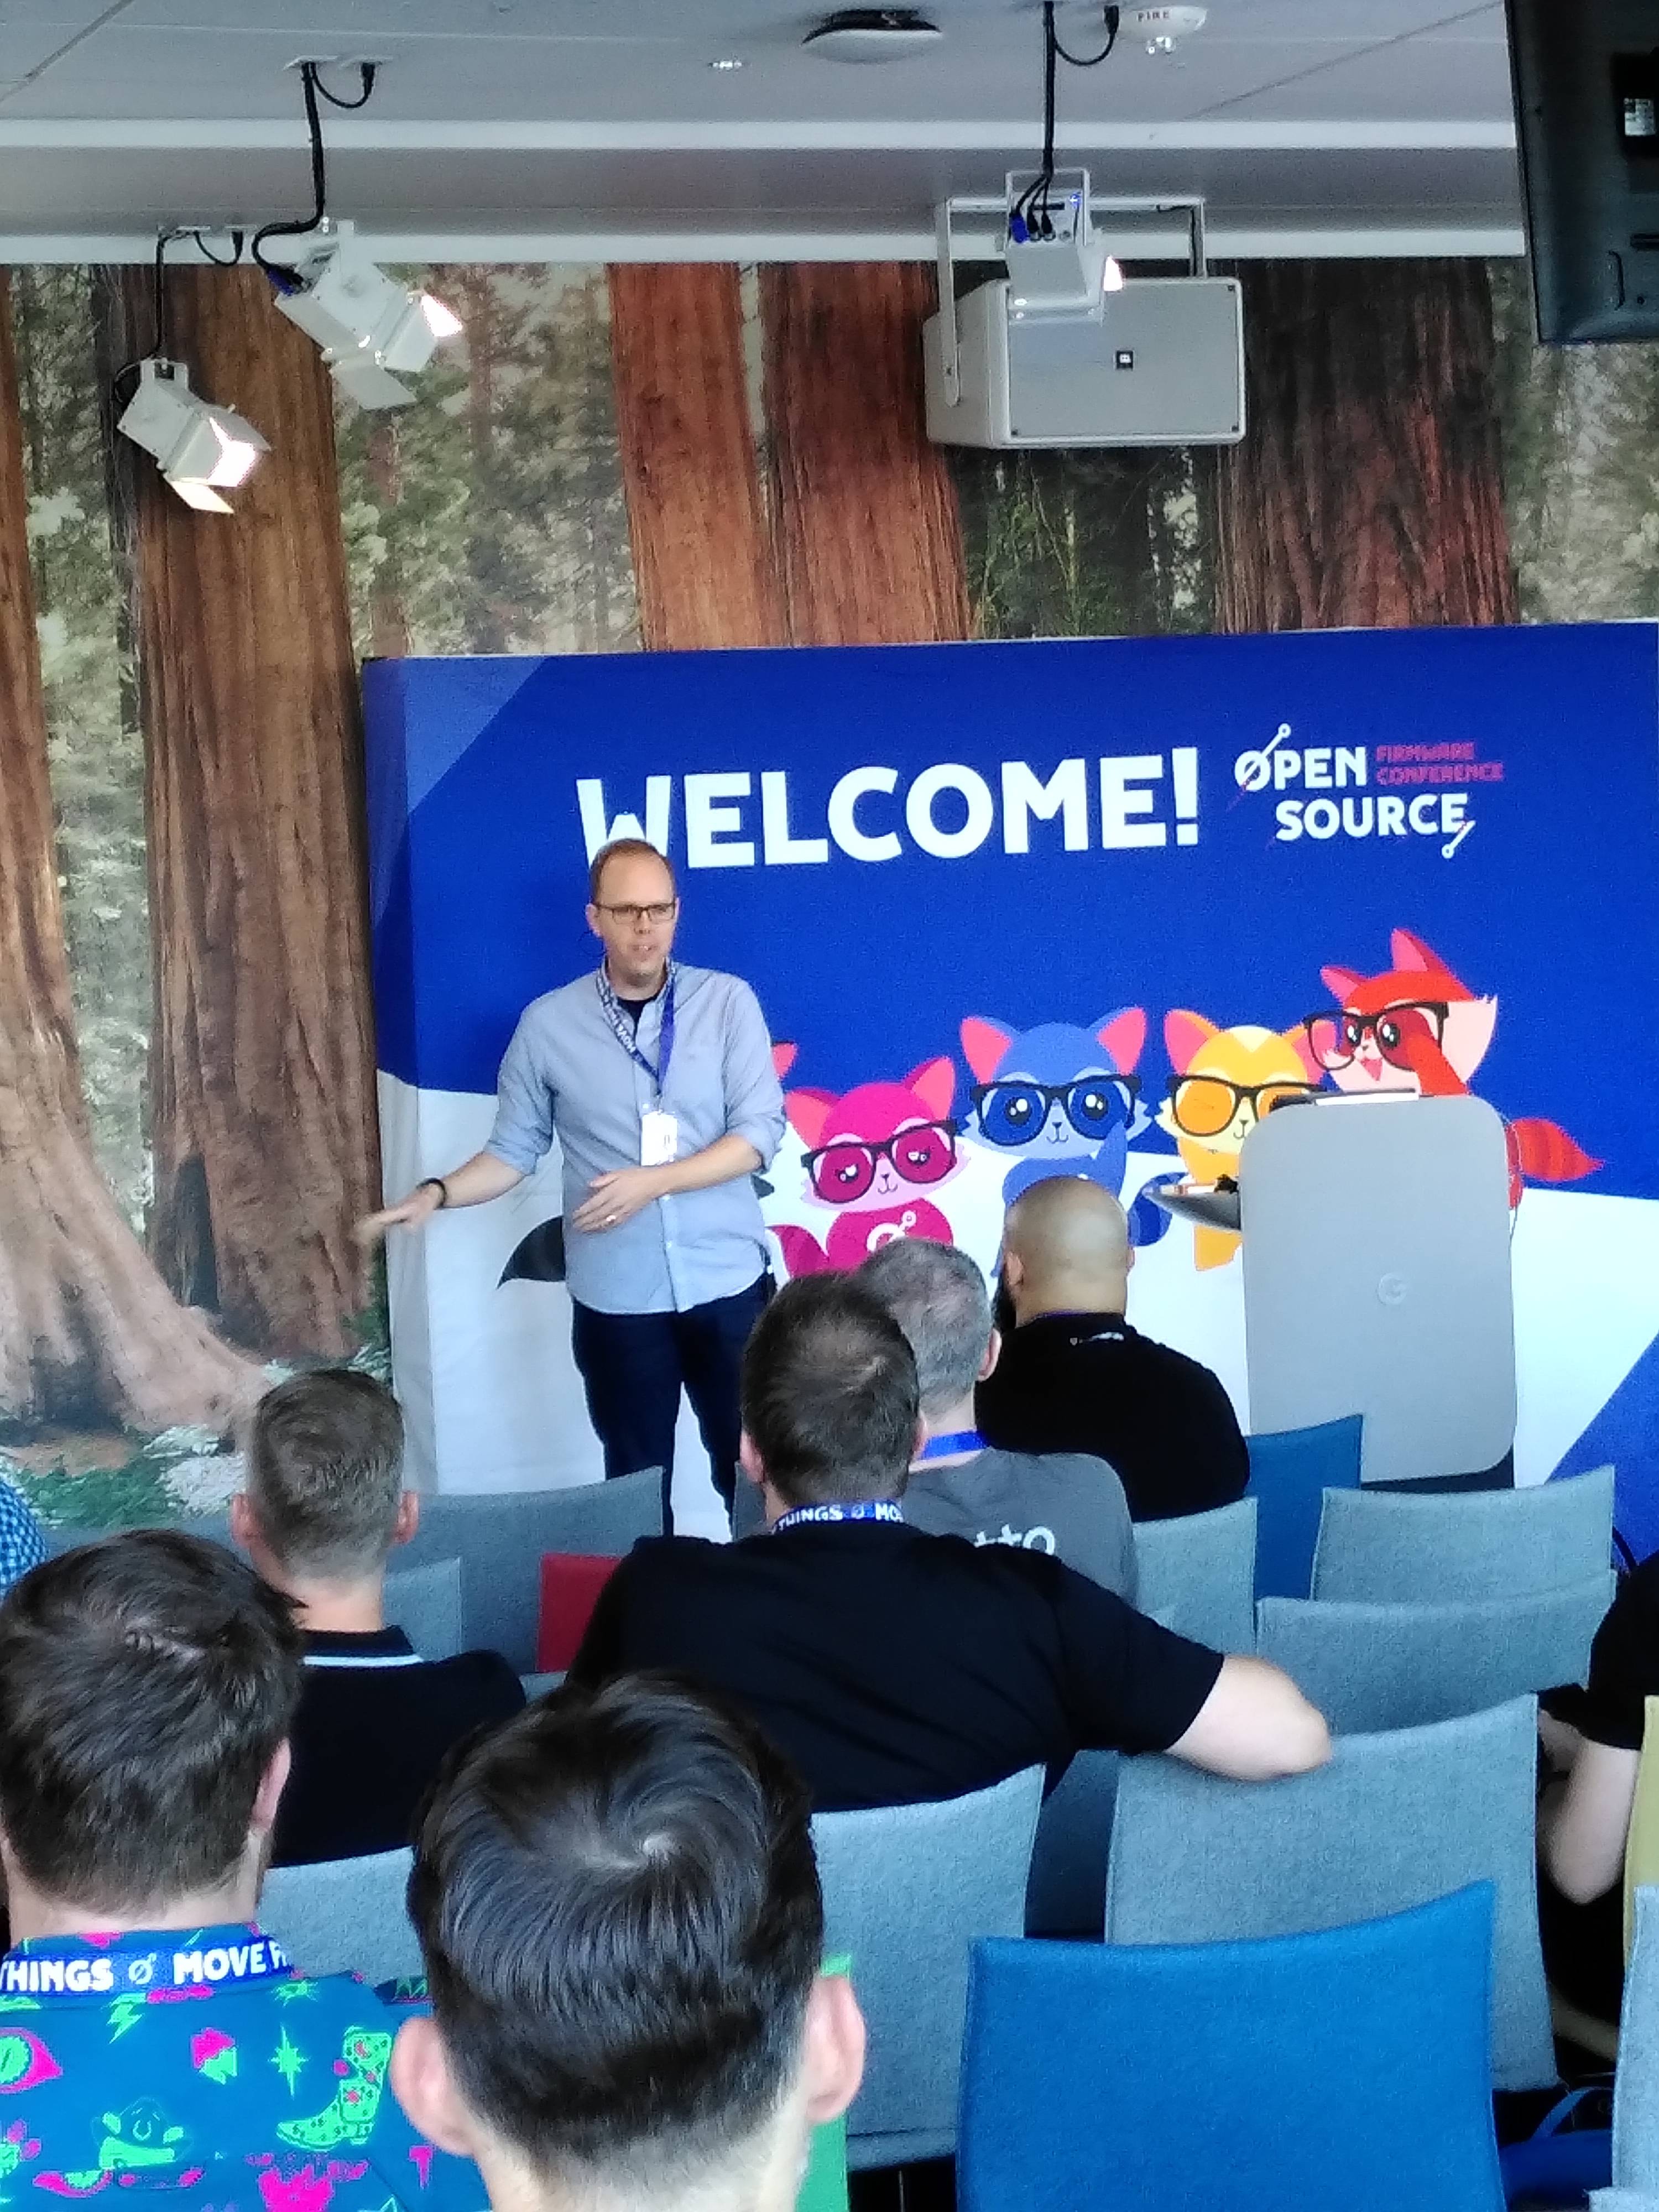 White guy with blue shirt and black trousers on the podium in the main OSFC room gesticulating while talking. Backdrop says "Welcome! And something about "Open Source".